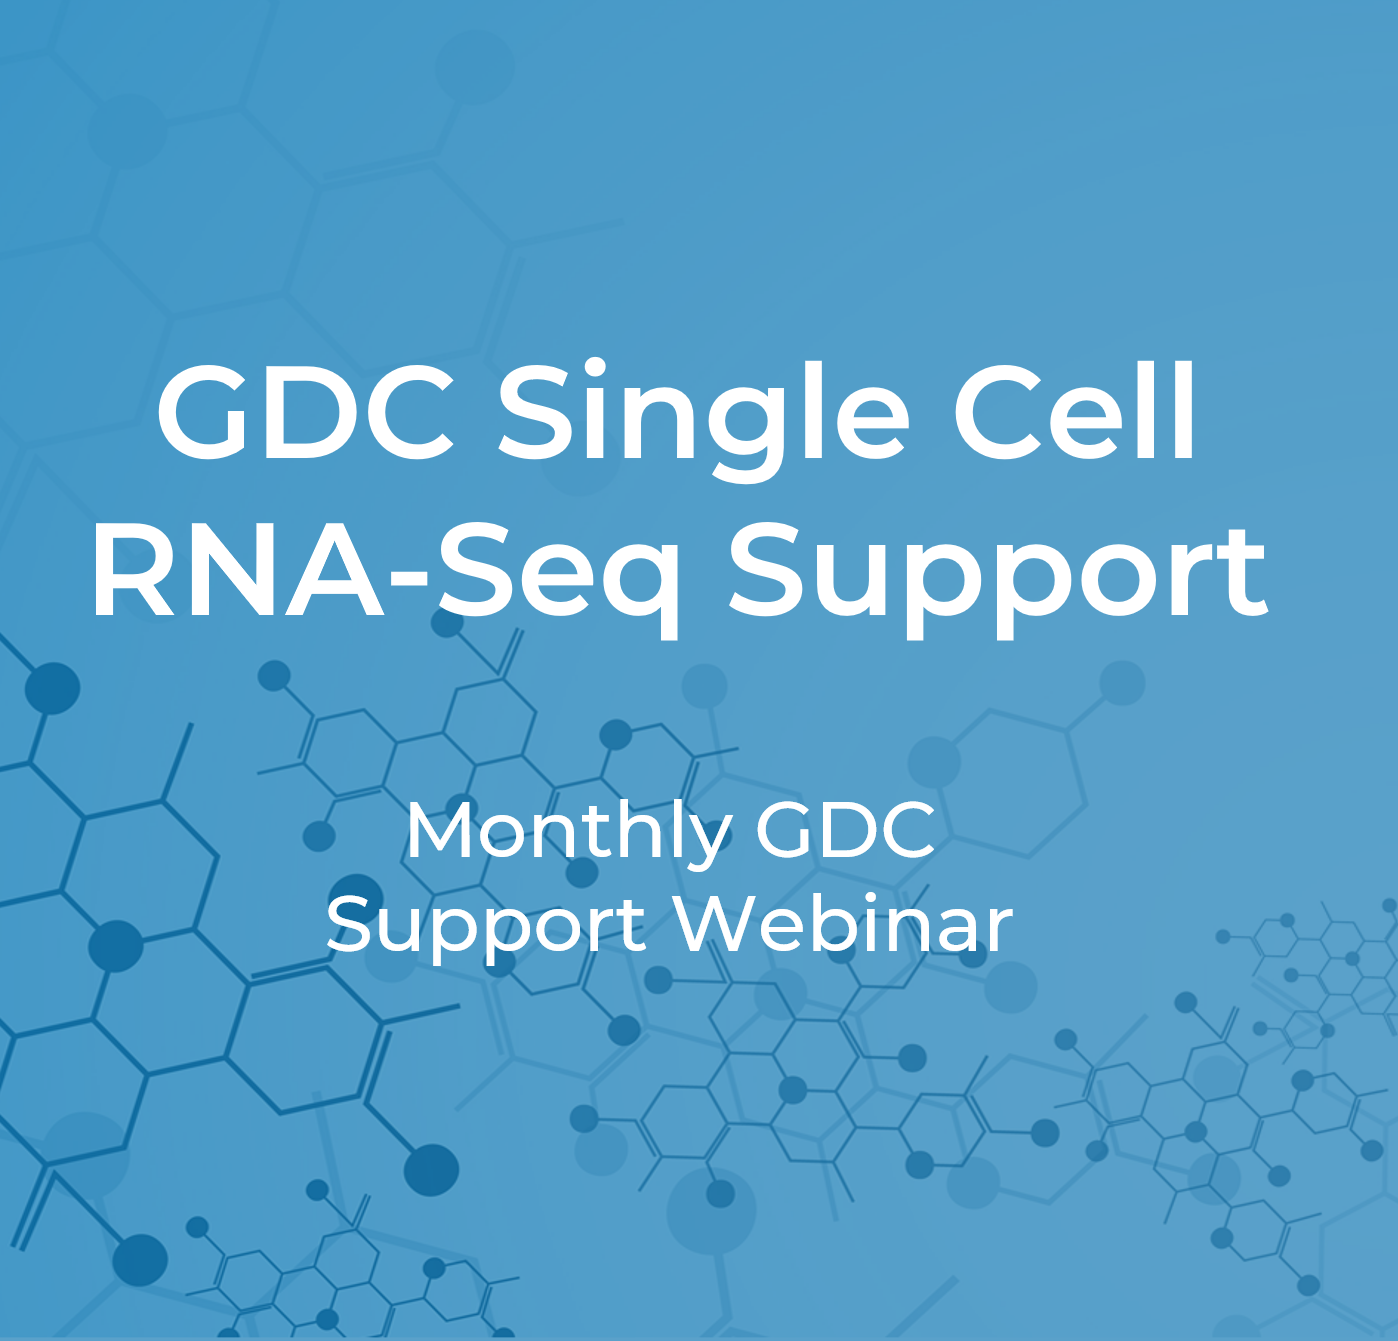 GDC Single Cell RNA-Seq Support | Monthly GDC Support Webinar